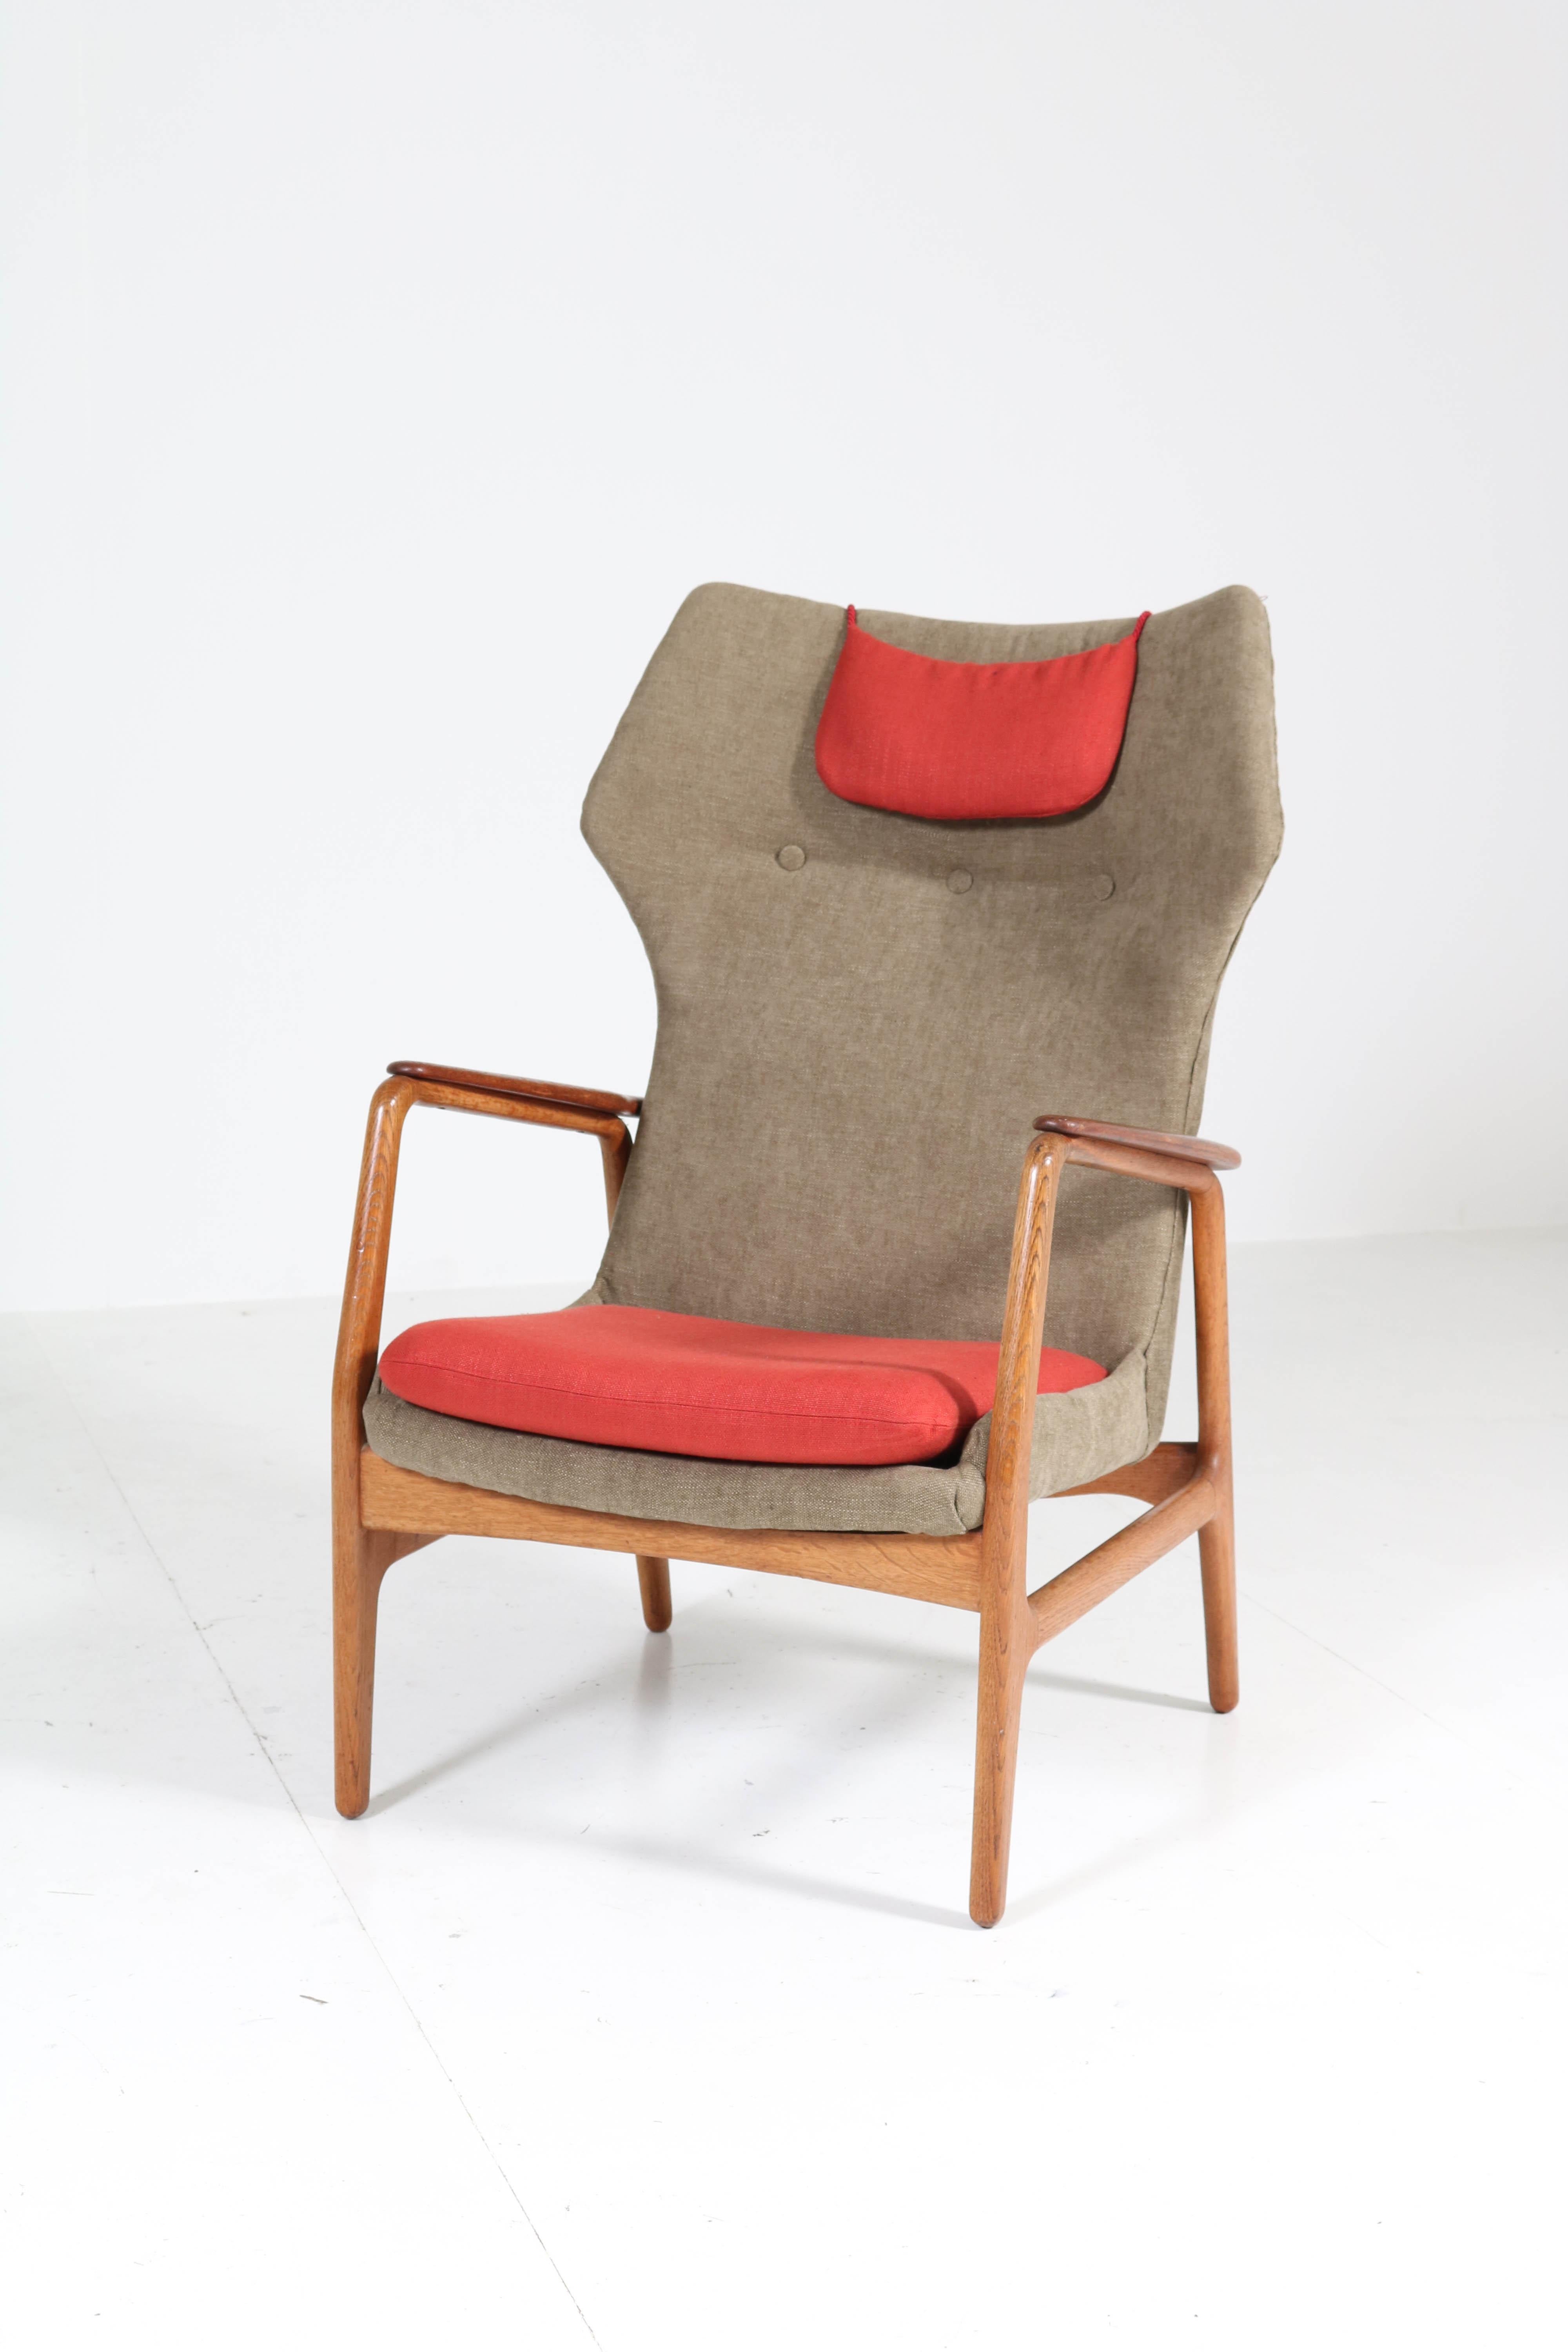 Stunning pair of Mid-Century Modern lounge chairs.
Design by Aksel Bender Madsen for Bovenkamp.
Striking Danish design from the 1960s.
Solid oak frames with solid teak armrests.
Re-upholstered with quality Italian fabric.
The high back lounge